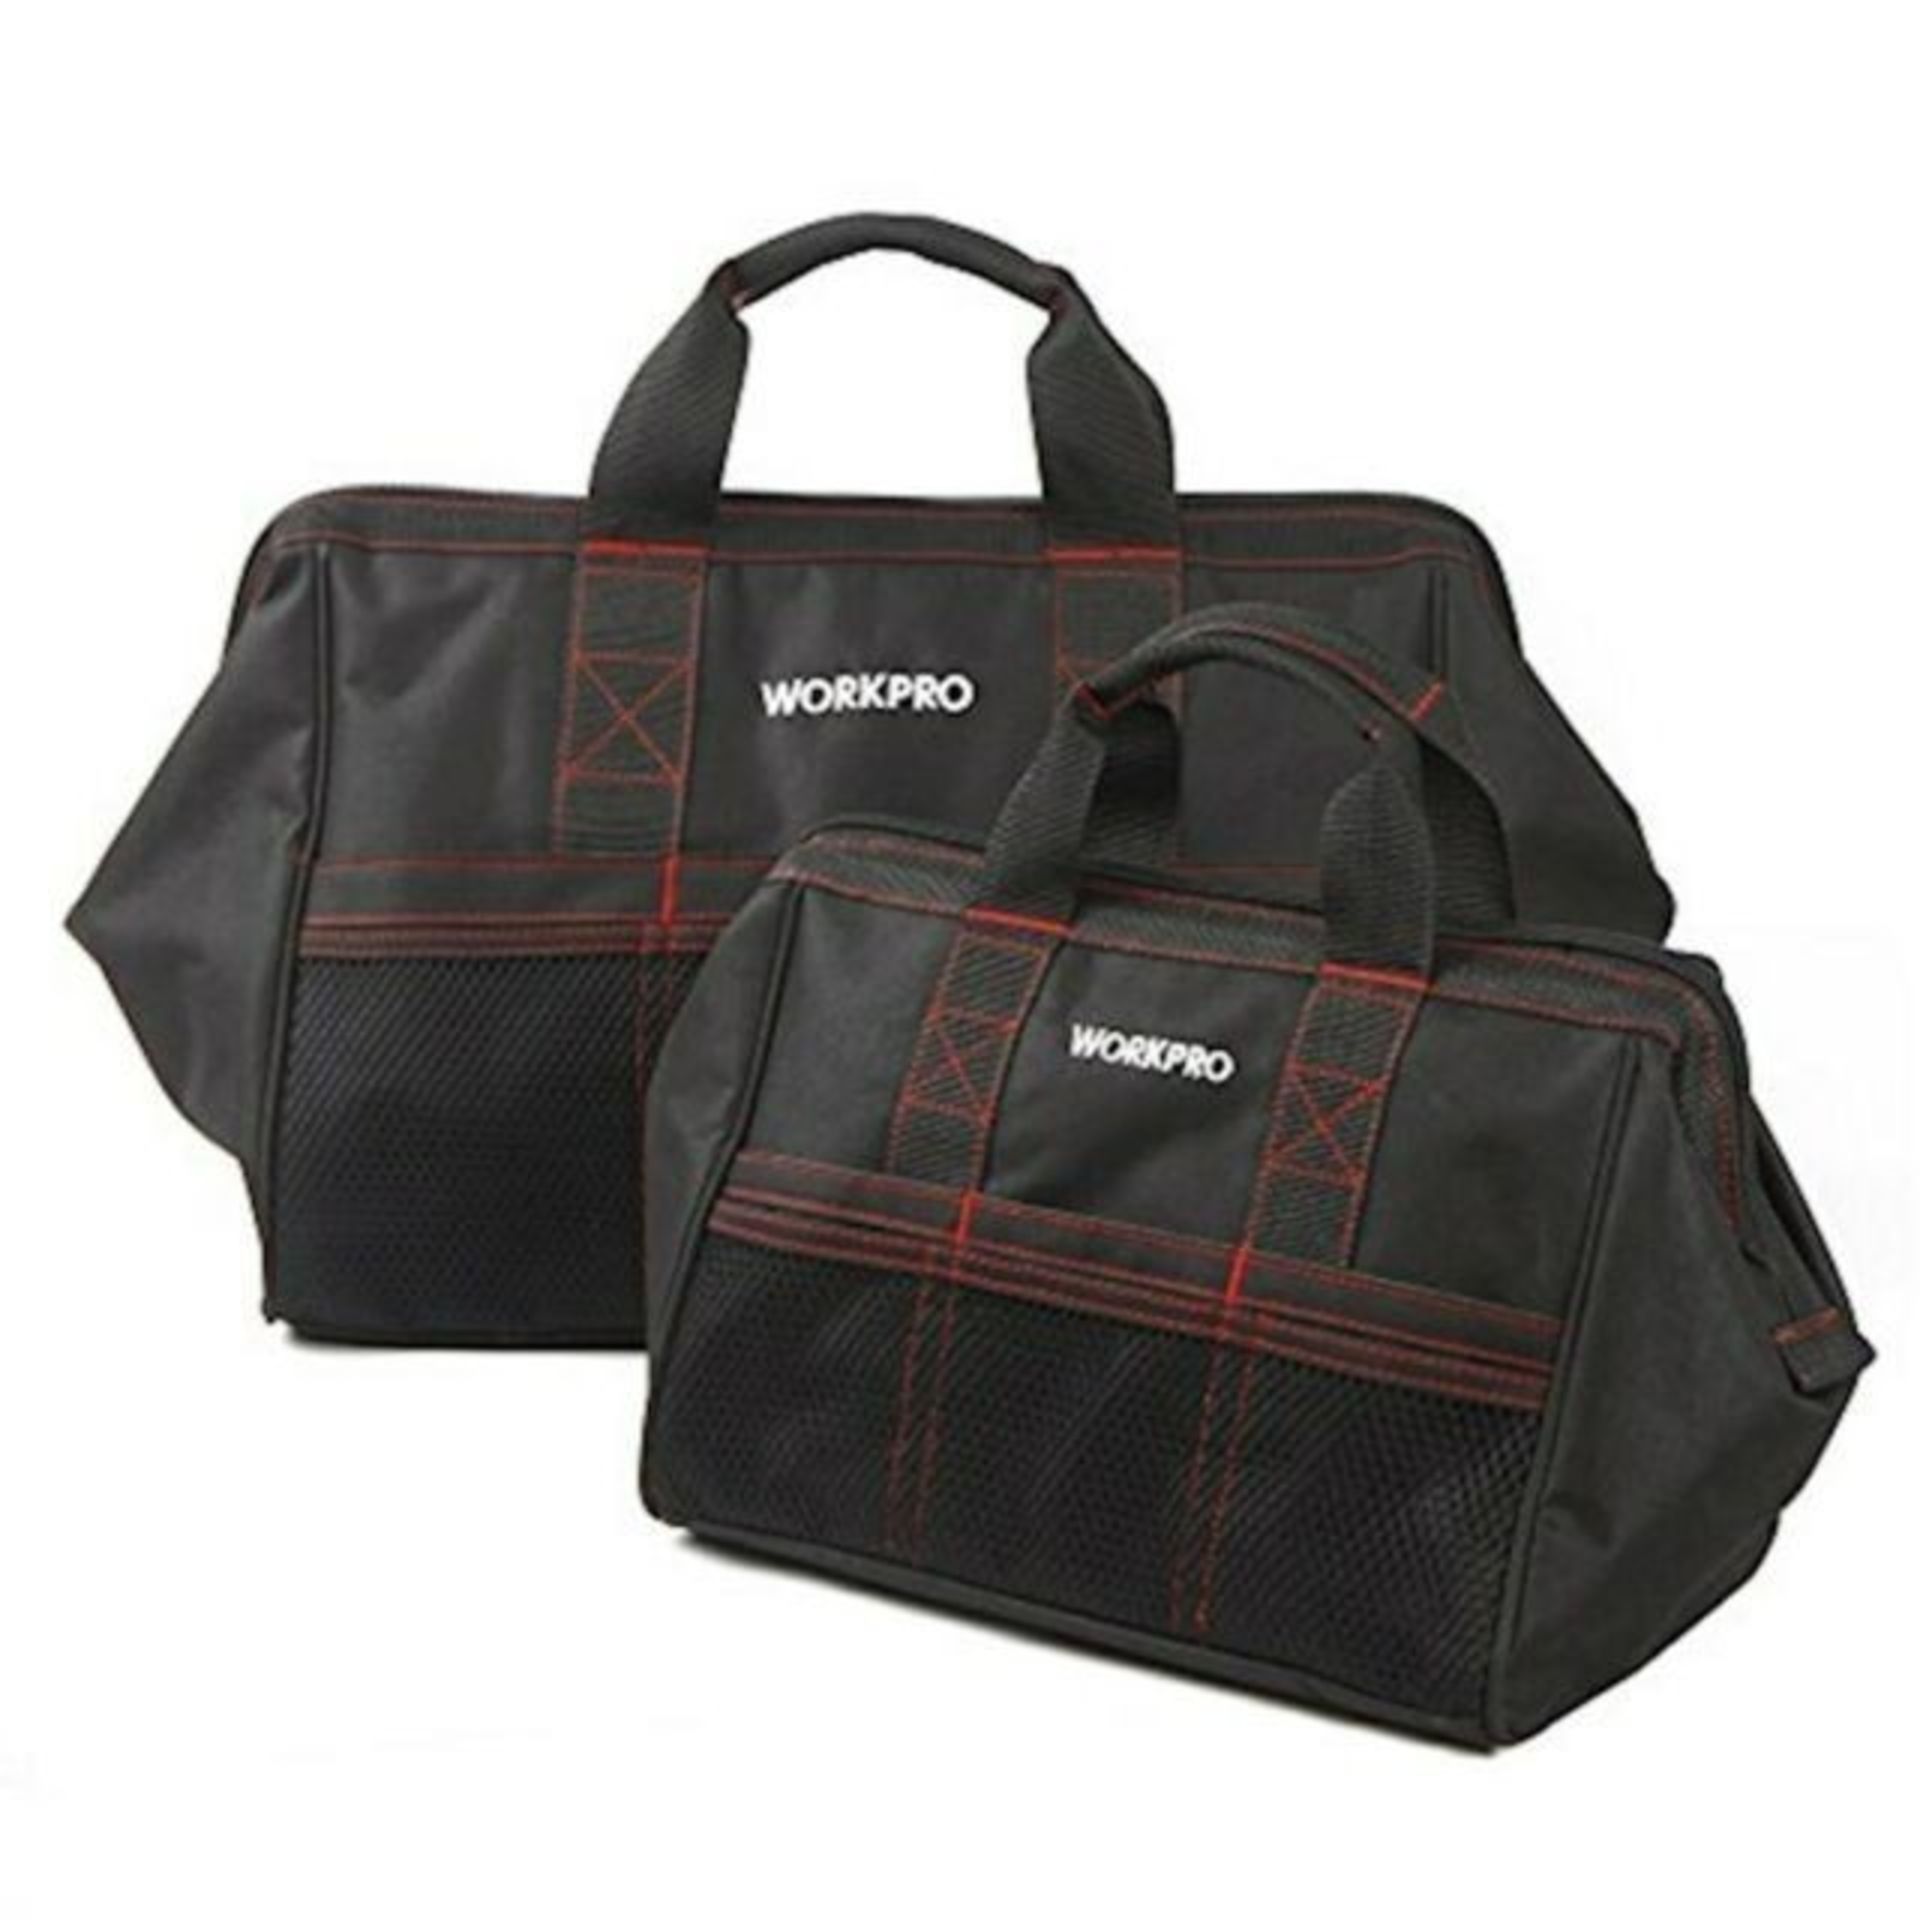 Lot to Contain 4 Workpro 2PC Combo Tool Bags Combined RRP £80 (W003500A)(Comes in 2 Boxes)